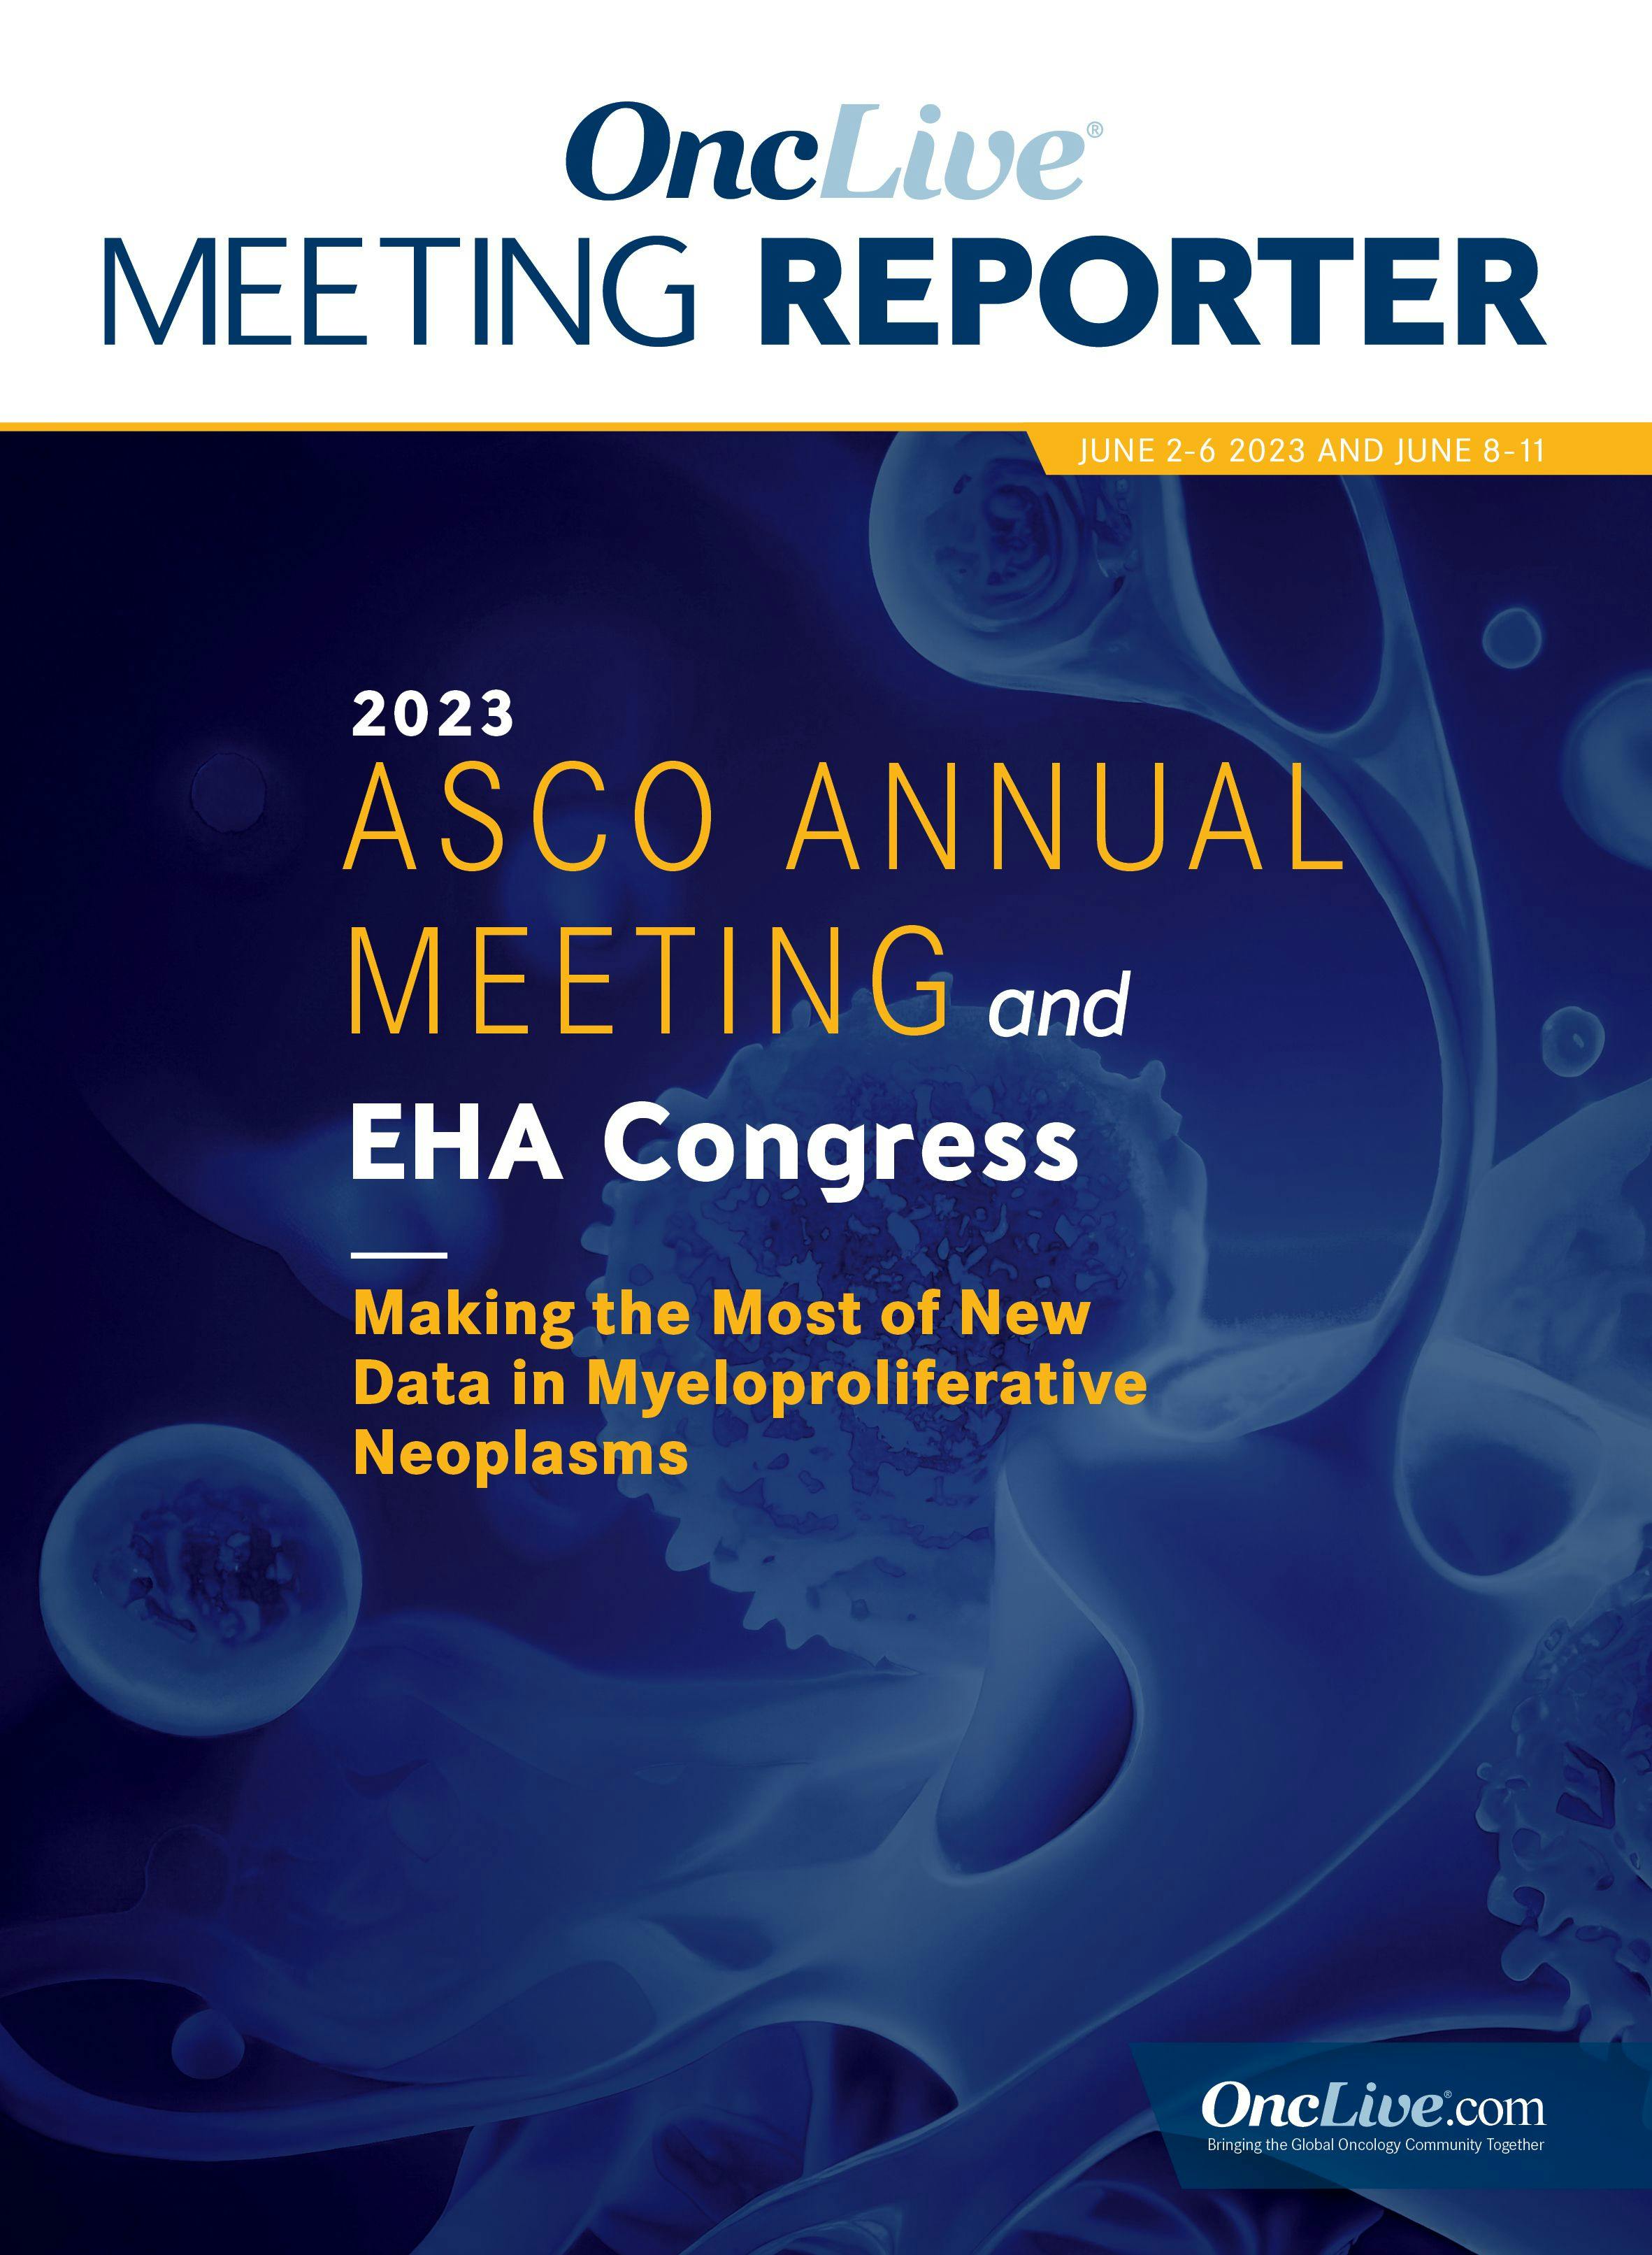 ASCO and EHA Meeting Reporter: Making the Most of New Data in Myeloproliferative Neoplasms